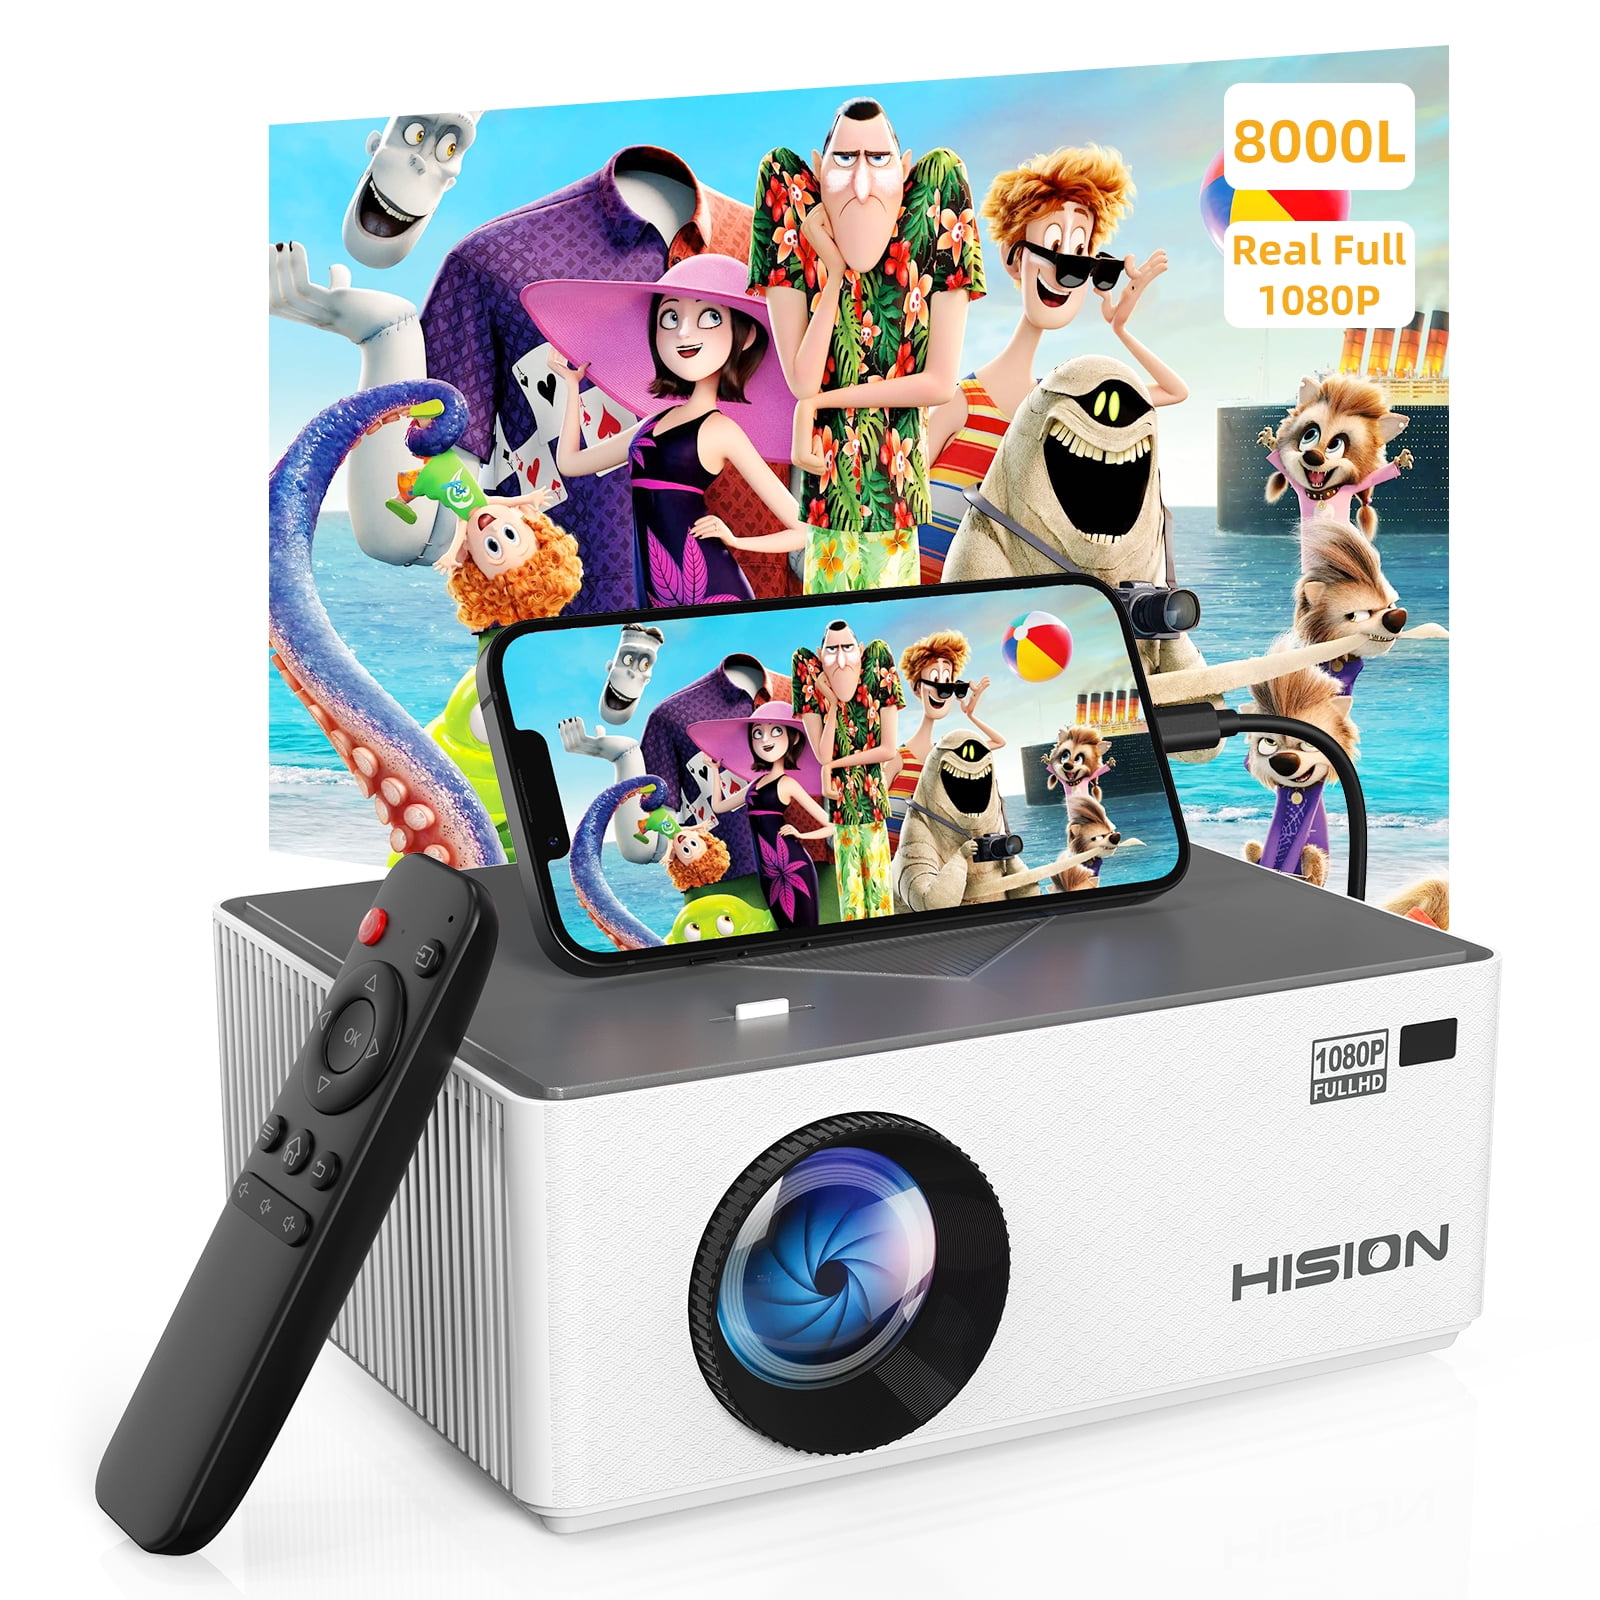 Outdoor Projector, HISION Mini Projector, Full HD Movie Projector with 200